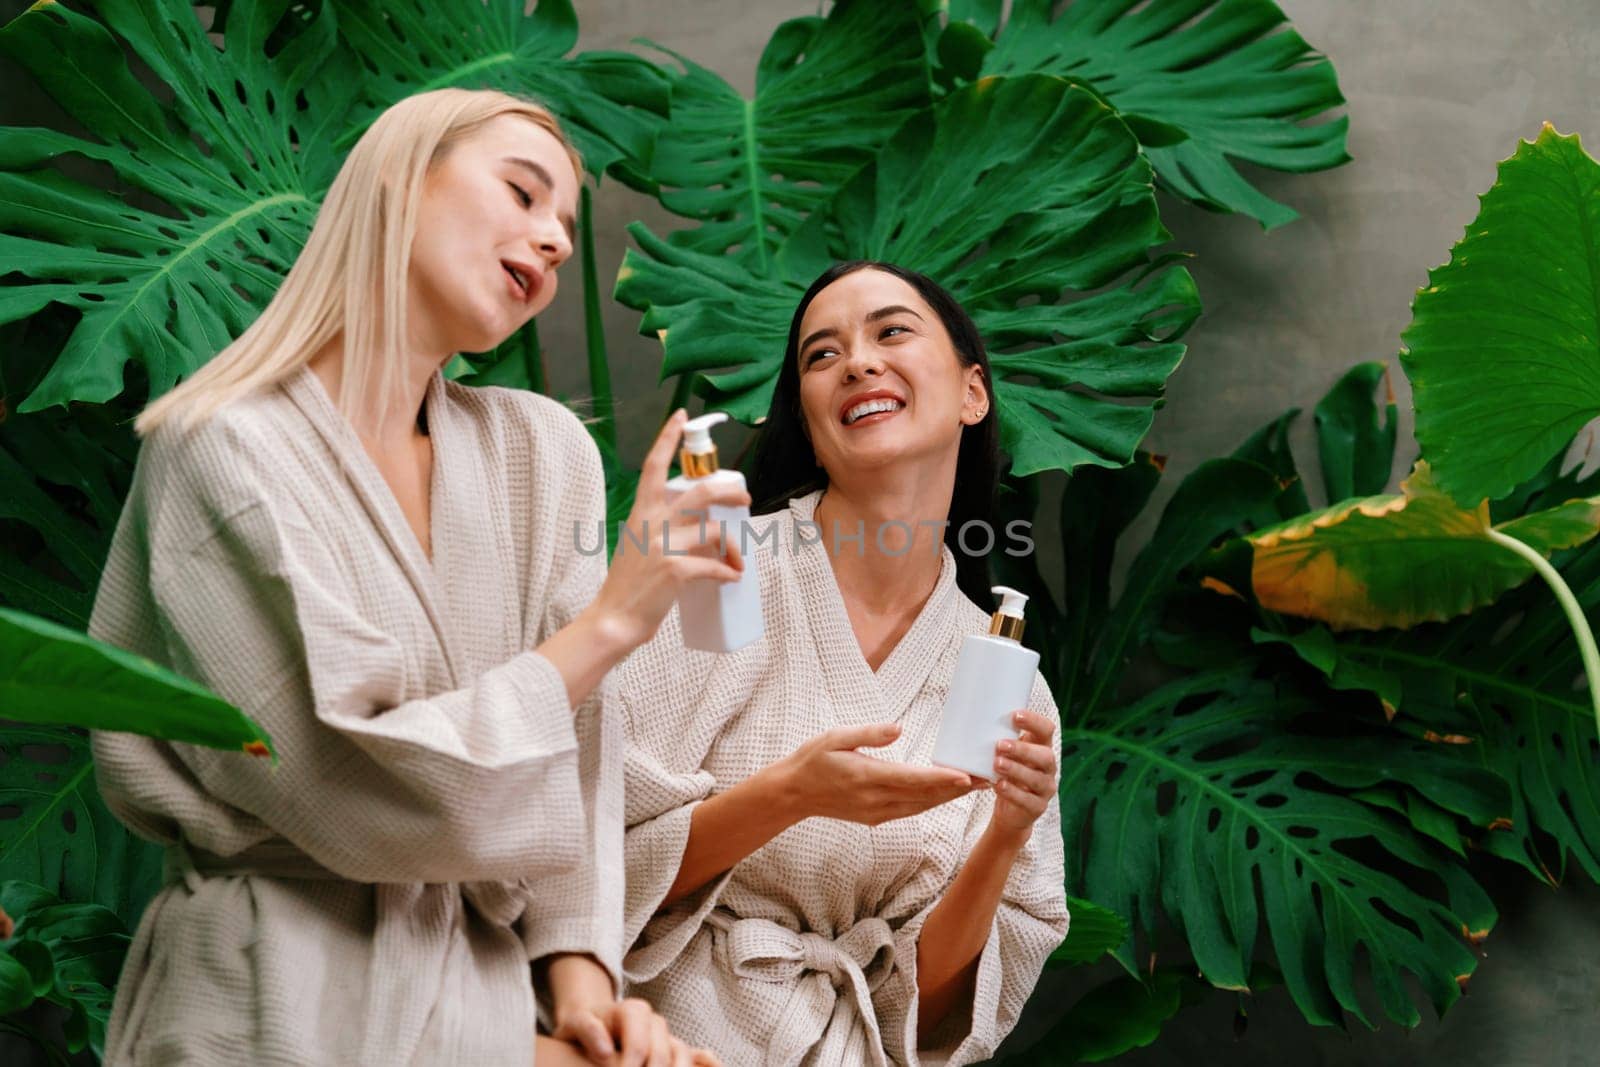 Tropical and exotic spa garden with bathtub in modern hotel or resort with two women in bathrobe holding beauty skincare product while enjoying leisure lush with greenery foliage background. Blithe